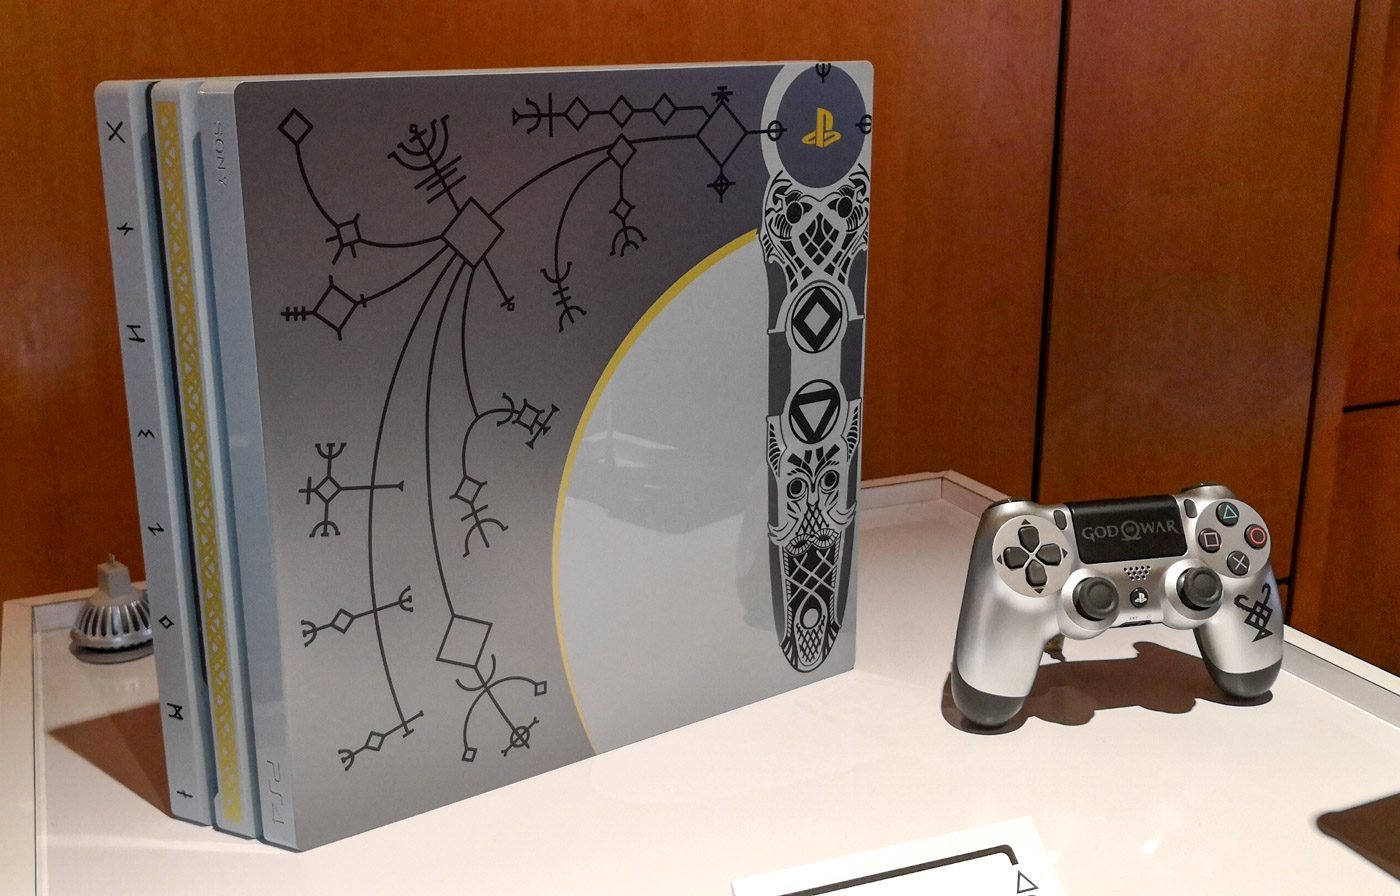 halv otte Hold sammen med sikkerhed The 'God of War' PS4 Pro and the meanings behind the markings